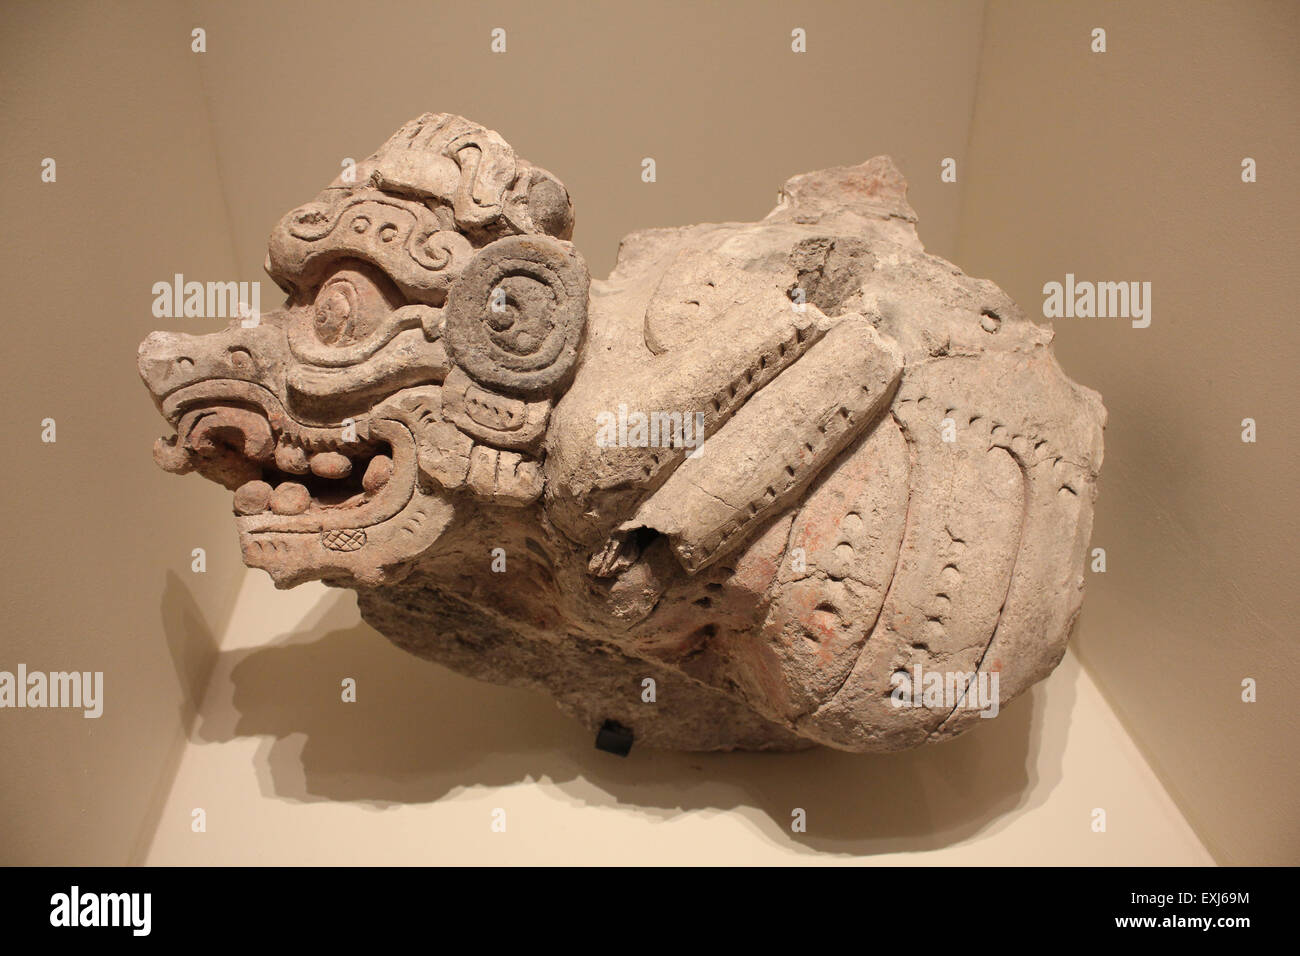 Mayan Stucco Sculpture Depicting Underworld Insect, Early Classic Period AD 250-600 Tonina, Chiapas, Mexico Stock Photo